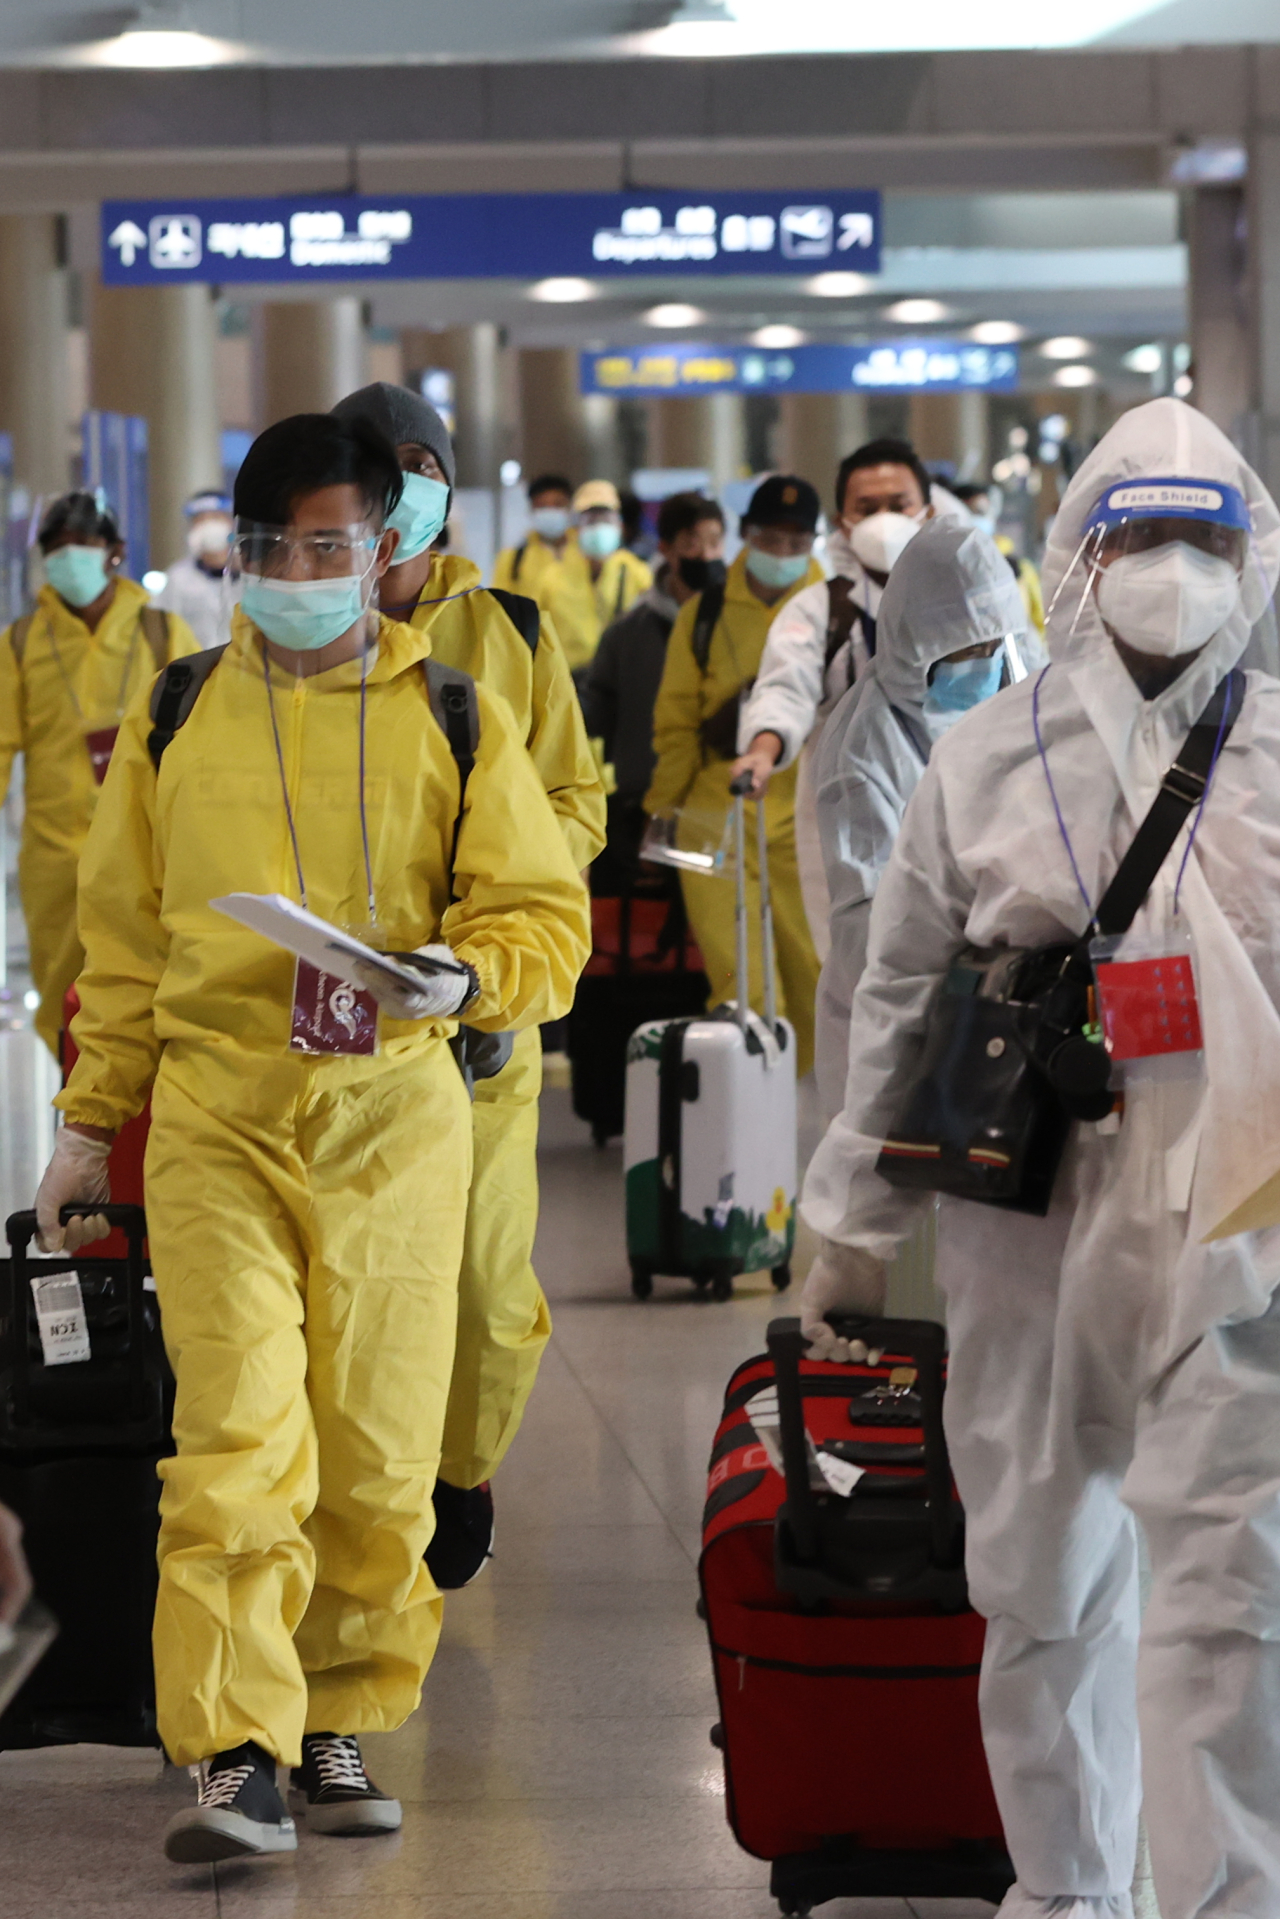 Passengers wearing protective gear arrive at Incheon airport, west of Seoul, amid the coronavirus pandemic on Monday, as health authorities have imposed an entry ban on foreign arrivals from eight African countries, including South Africa, to block the inflow of the new COVID-19 variant omicron. (Yonhap)